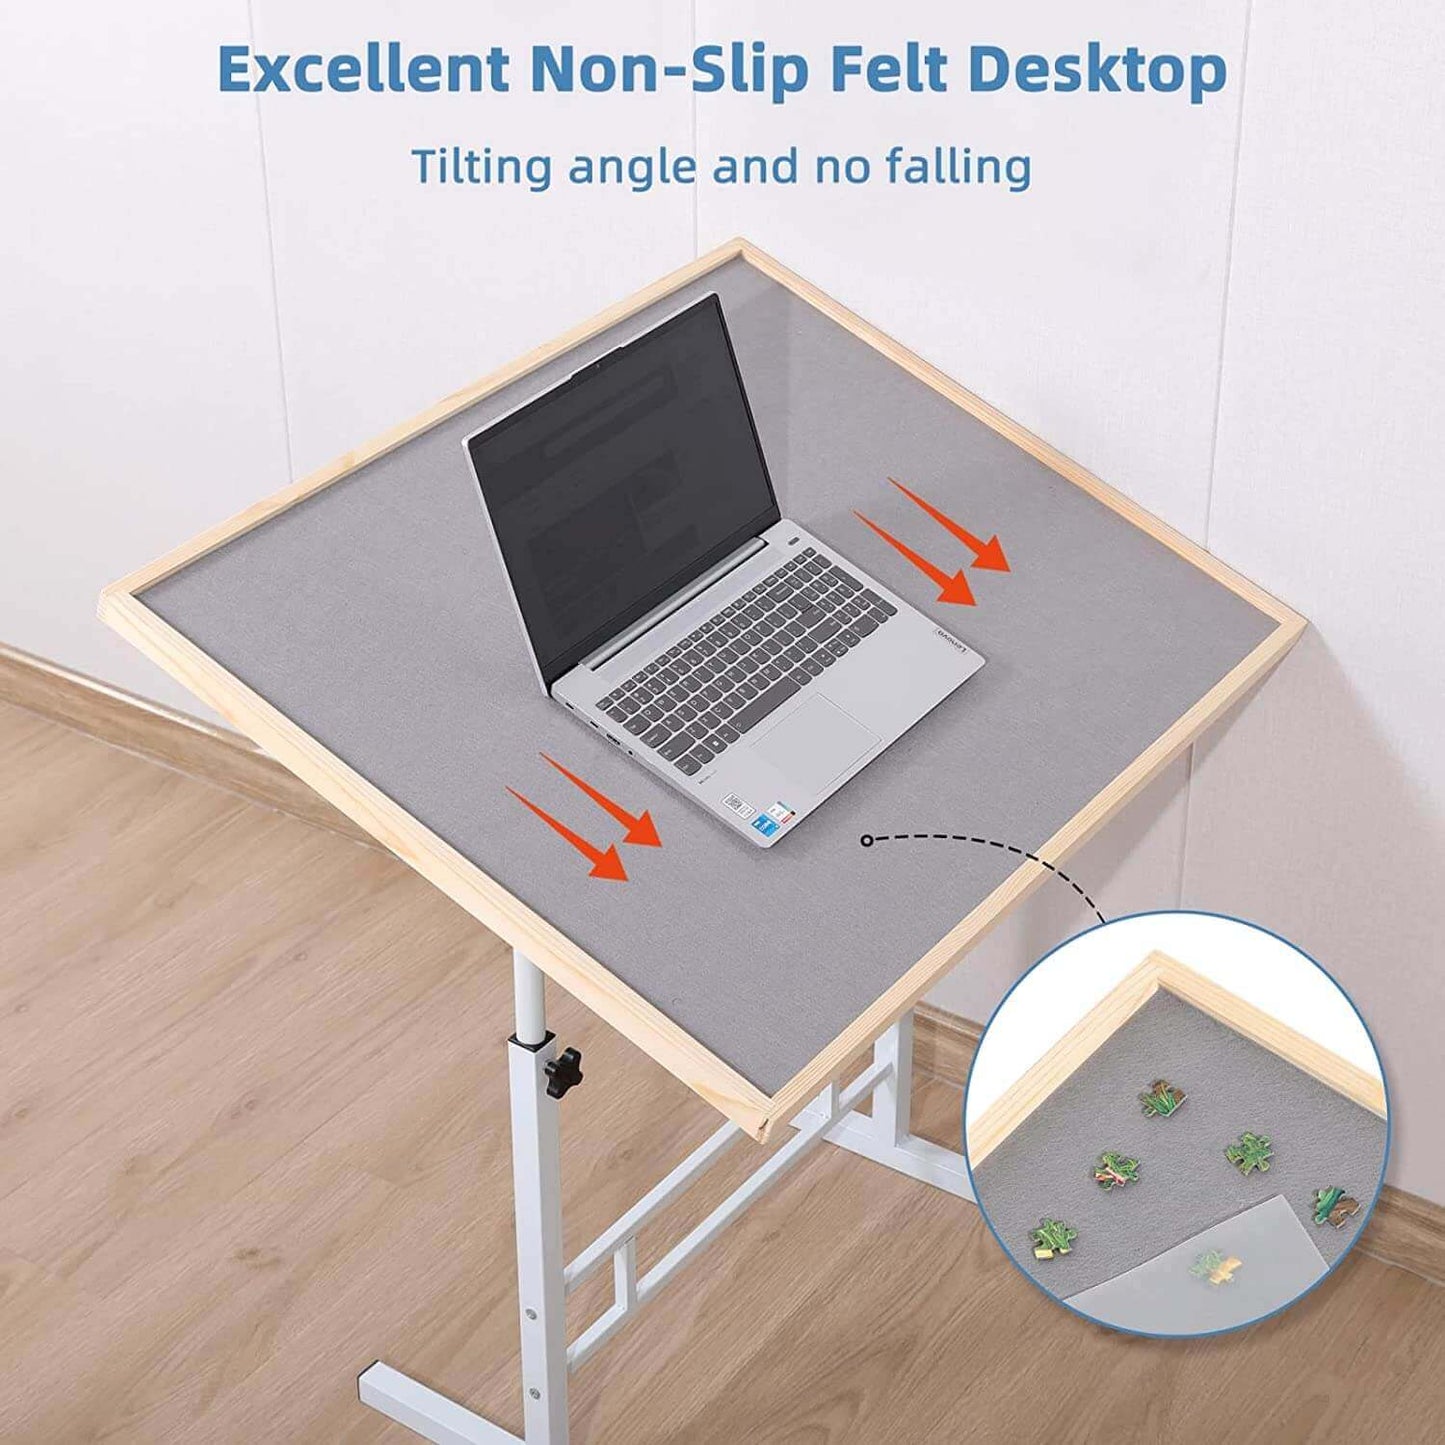 Fanwer jigsaw puzzle table with adjustable iron legs and puzzle board, a laptop desk